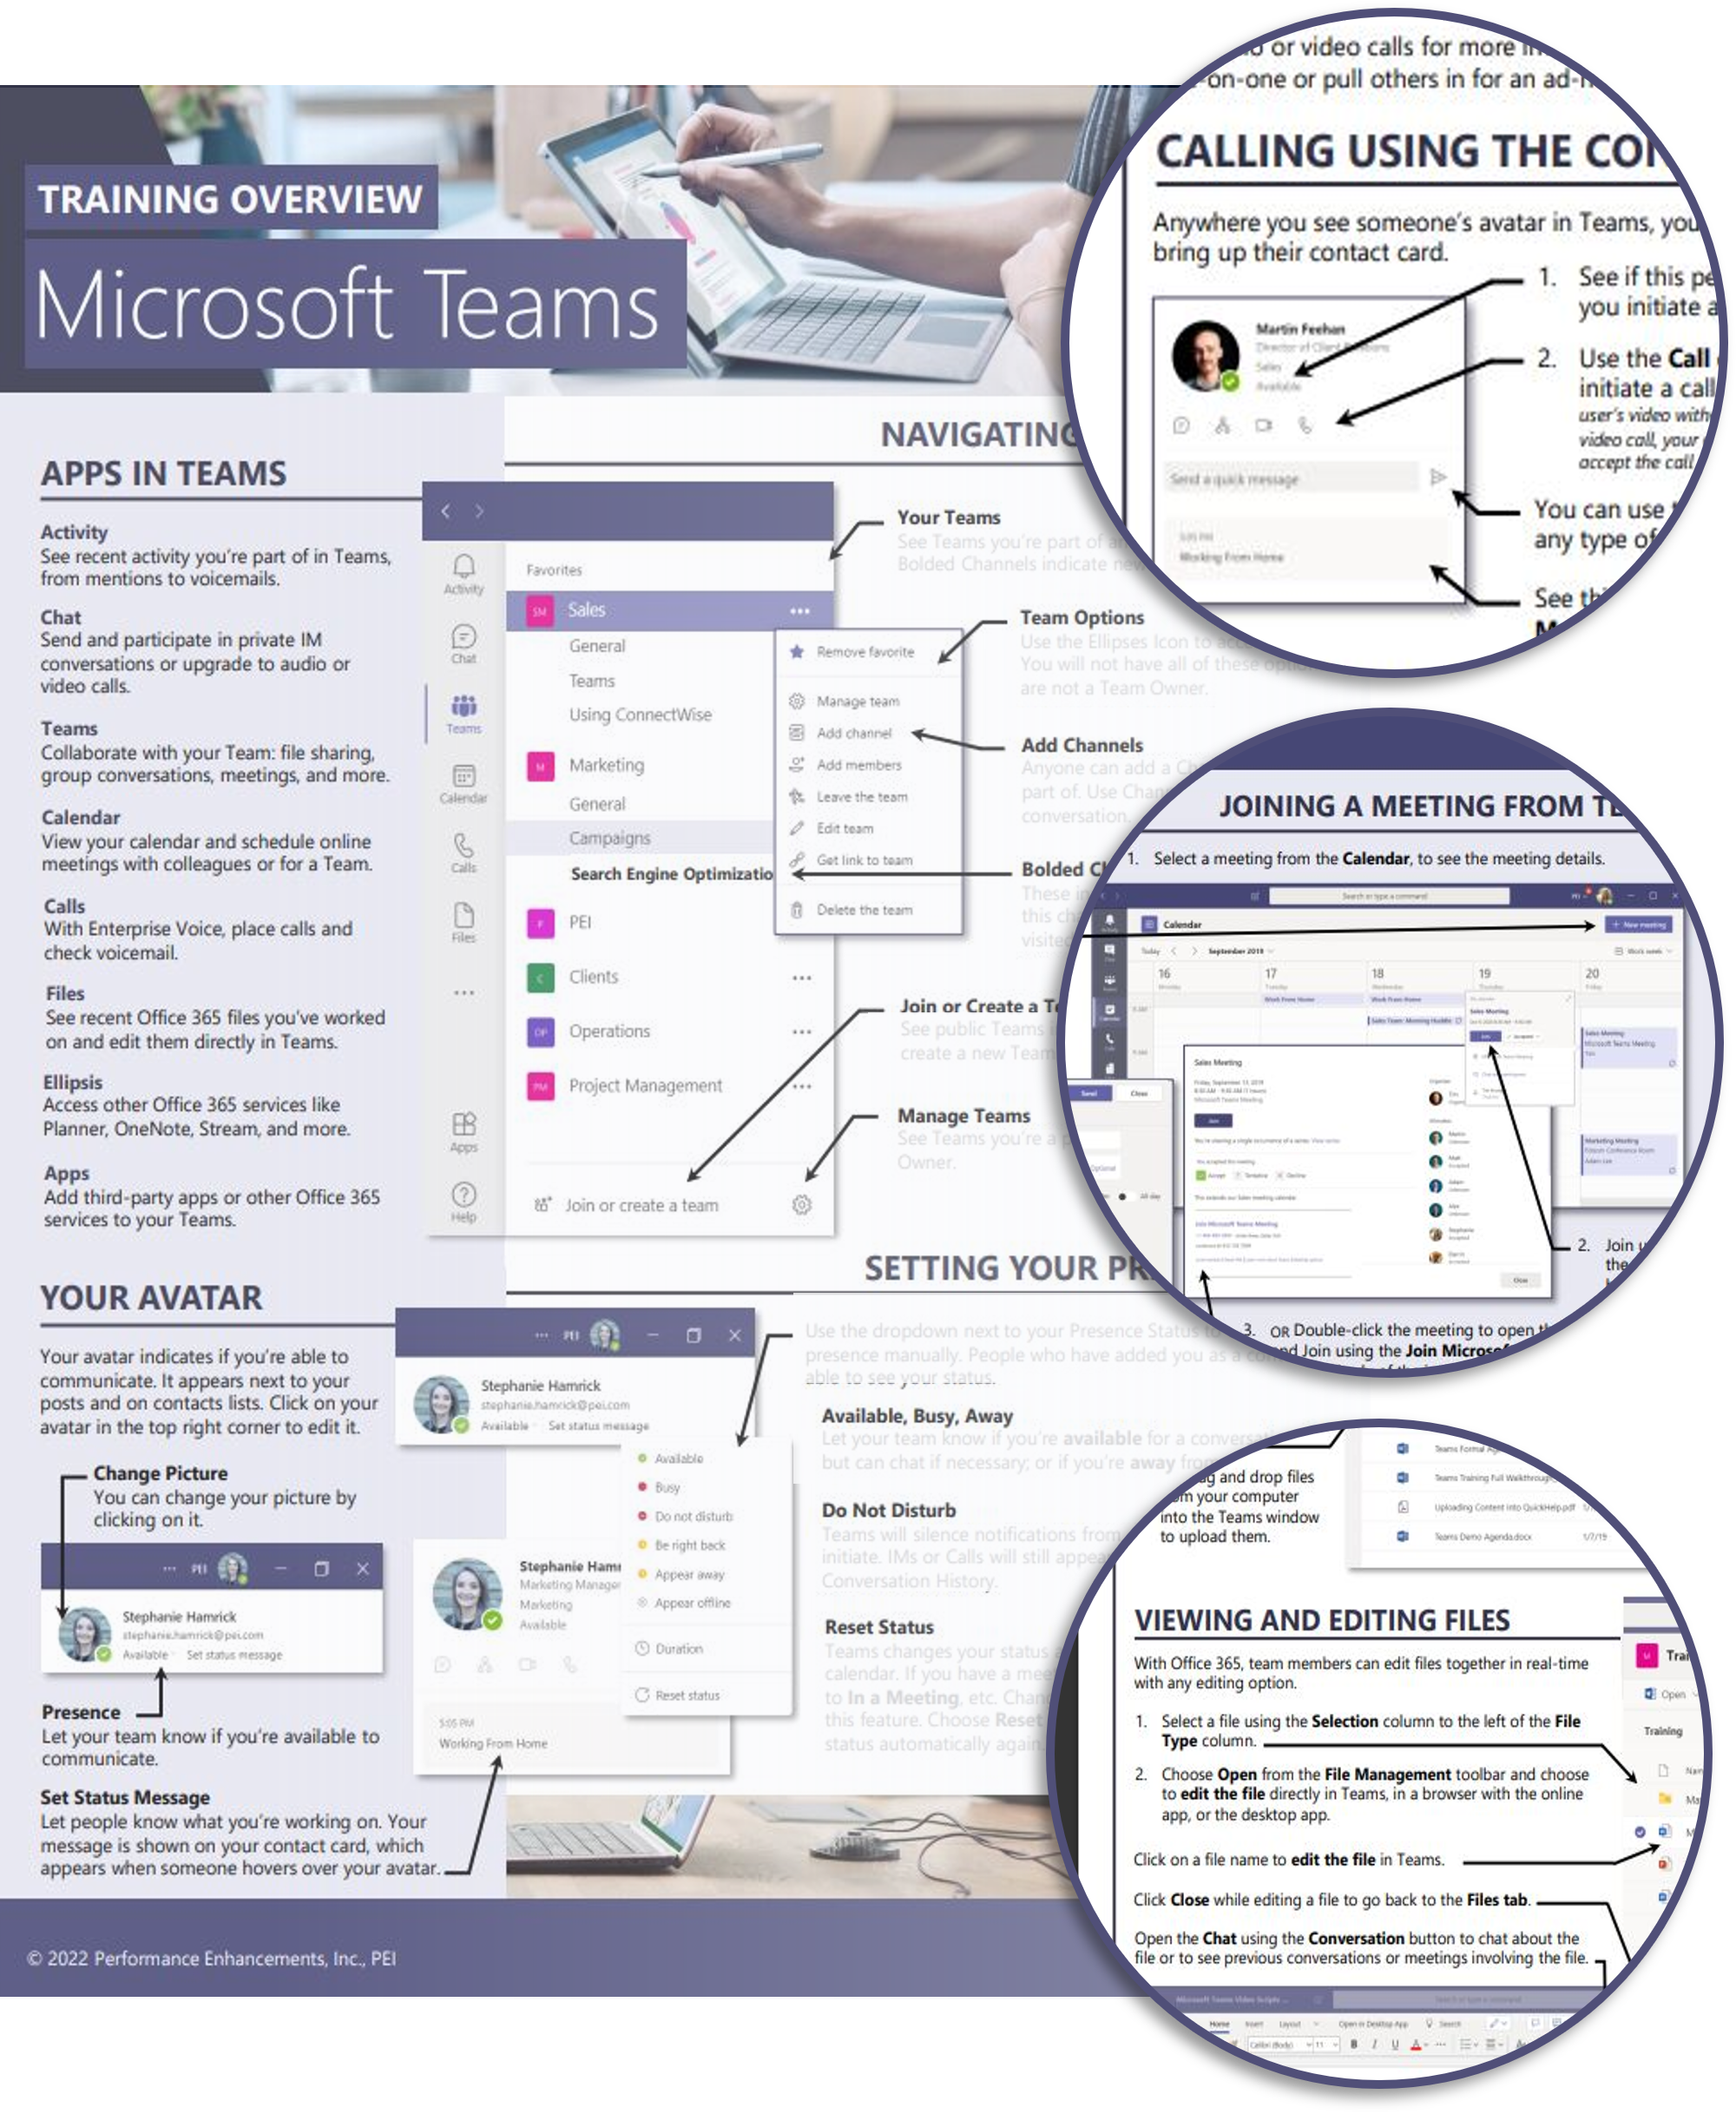 Download your Microsoft Teams Training Guide Sample!